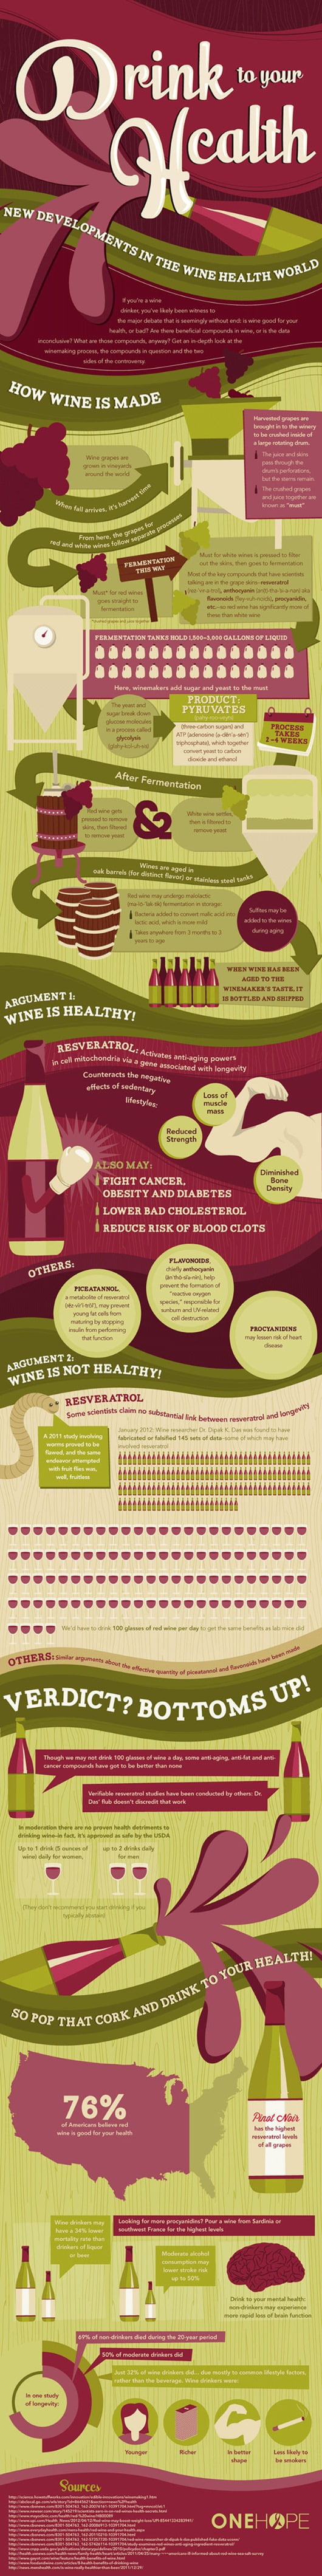 Drink-To-Your-Health-Wine-Infographic-r80